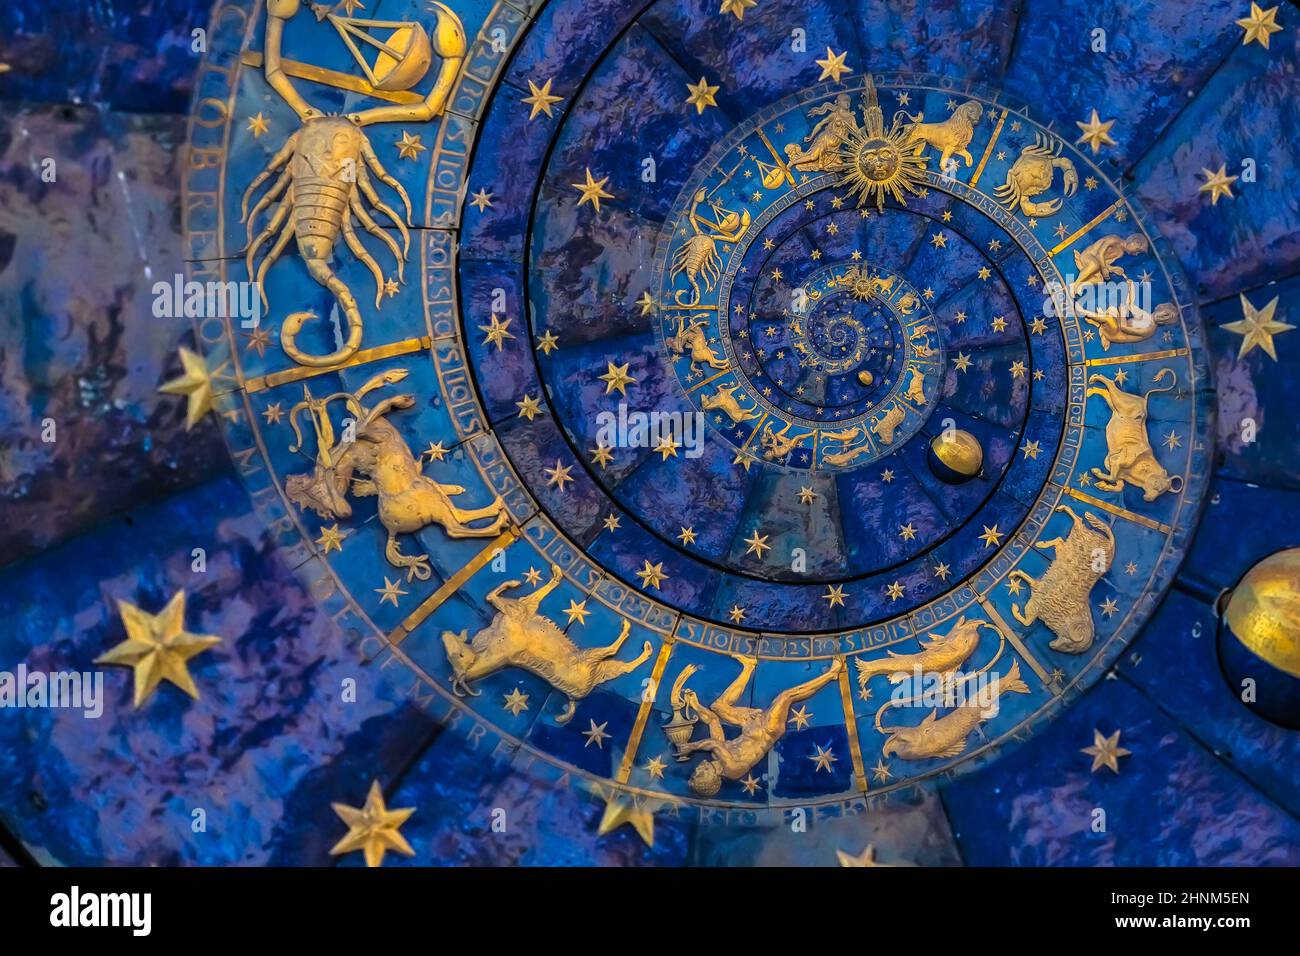 Droste effect background. Abstract design for concepts related to astrology and fantasy. Stock Photo